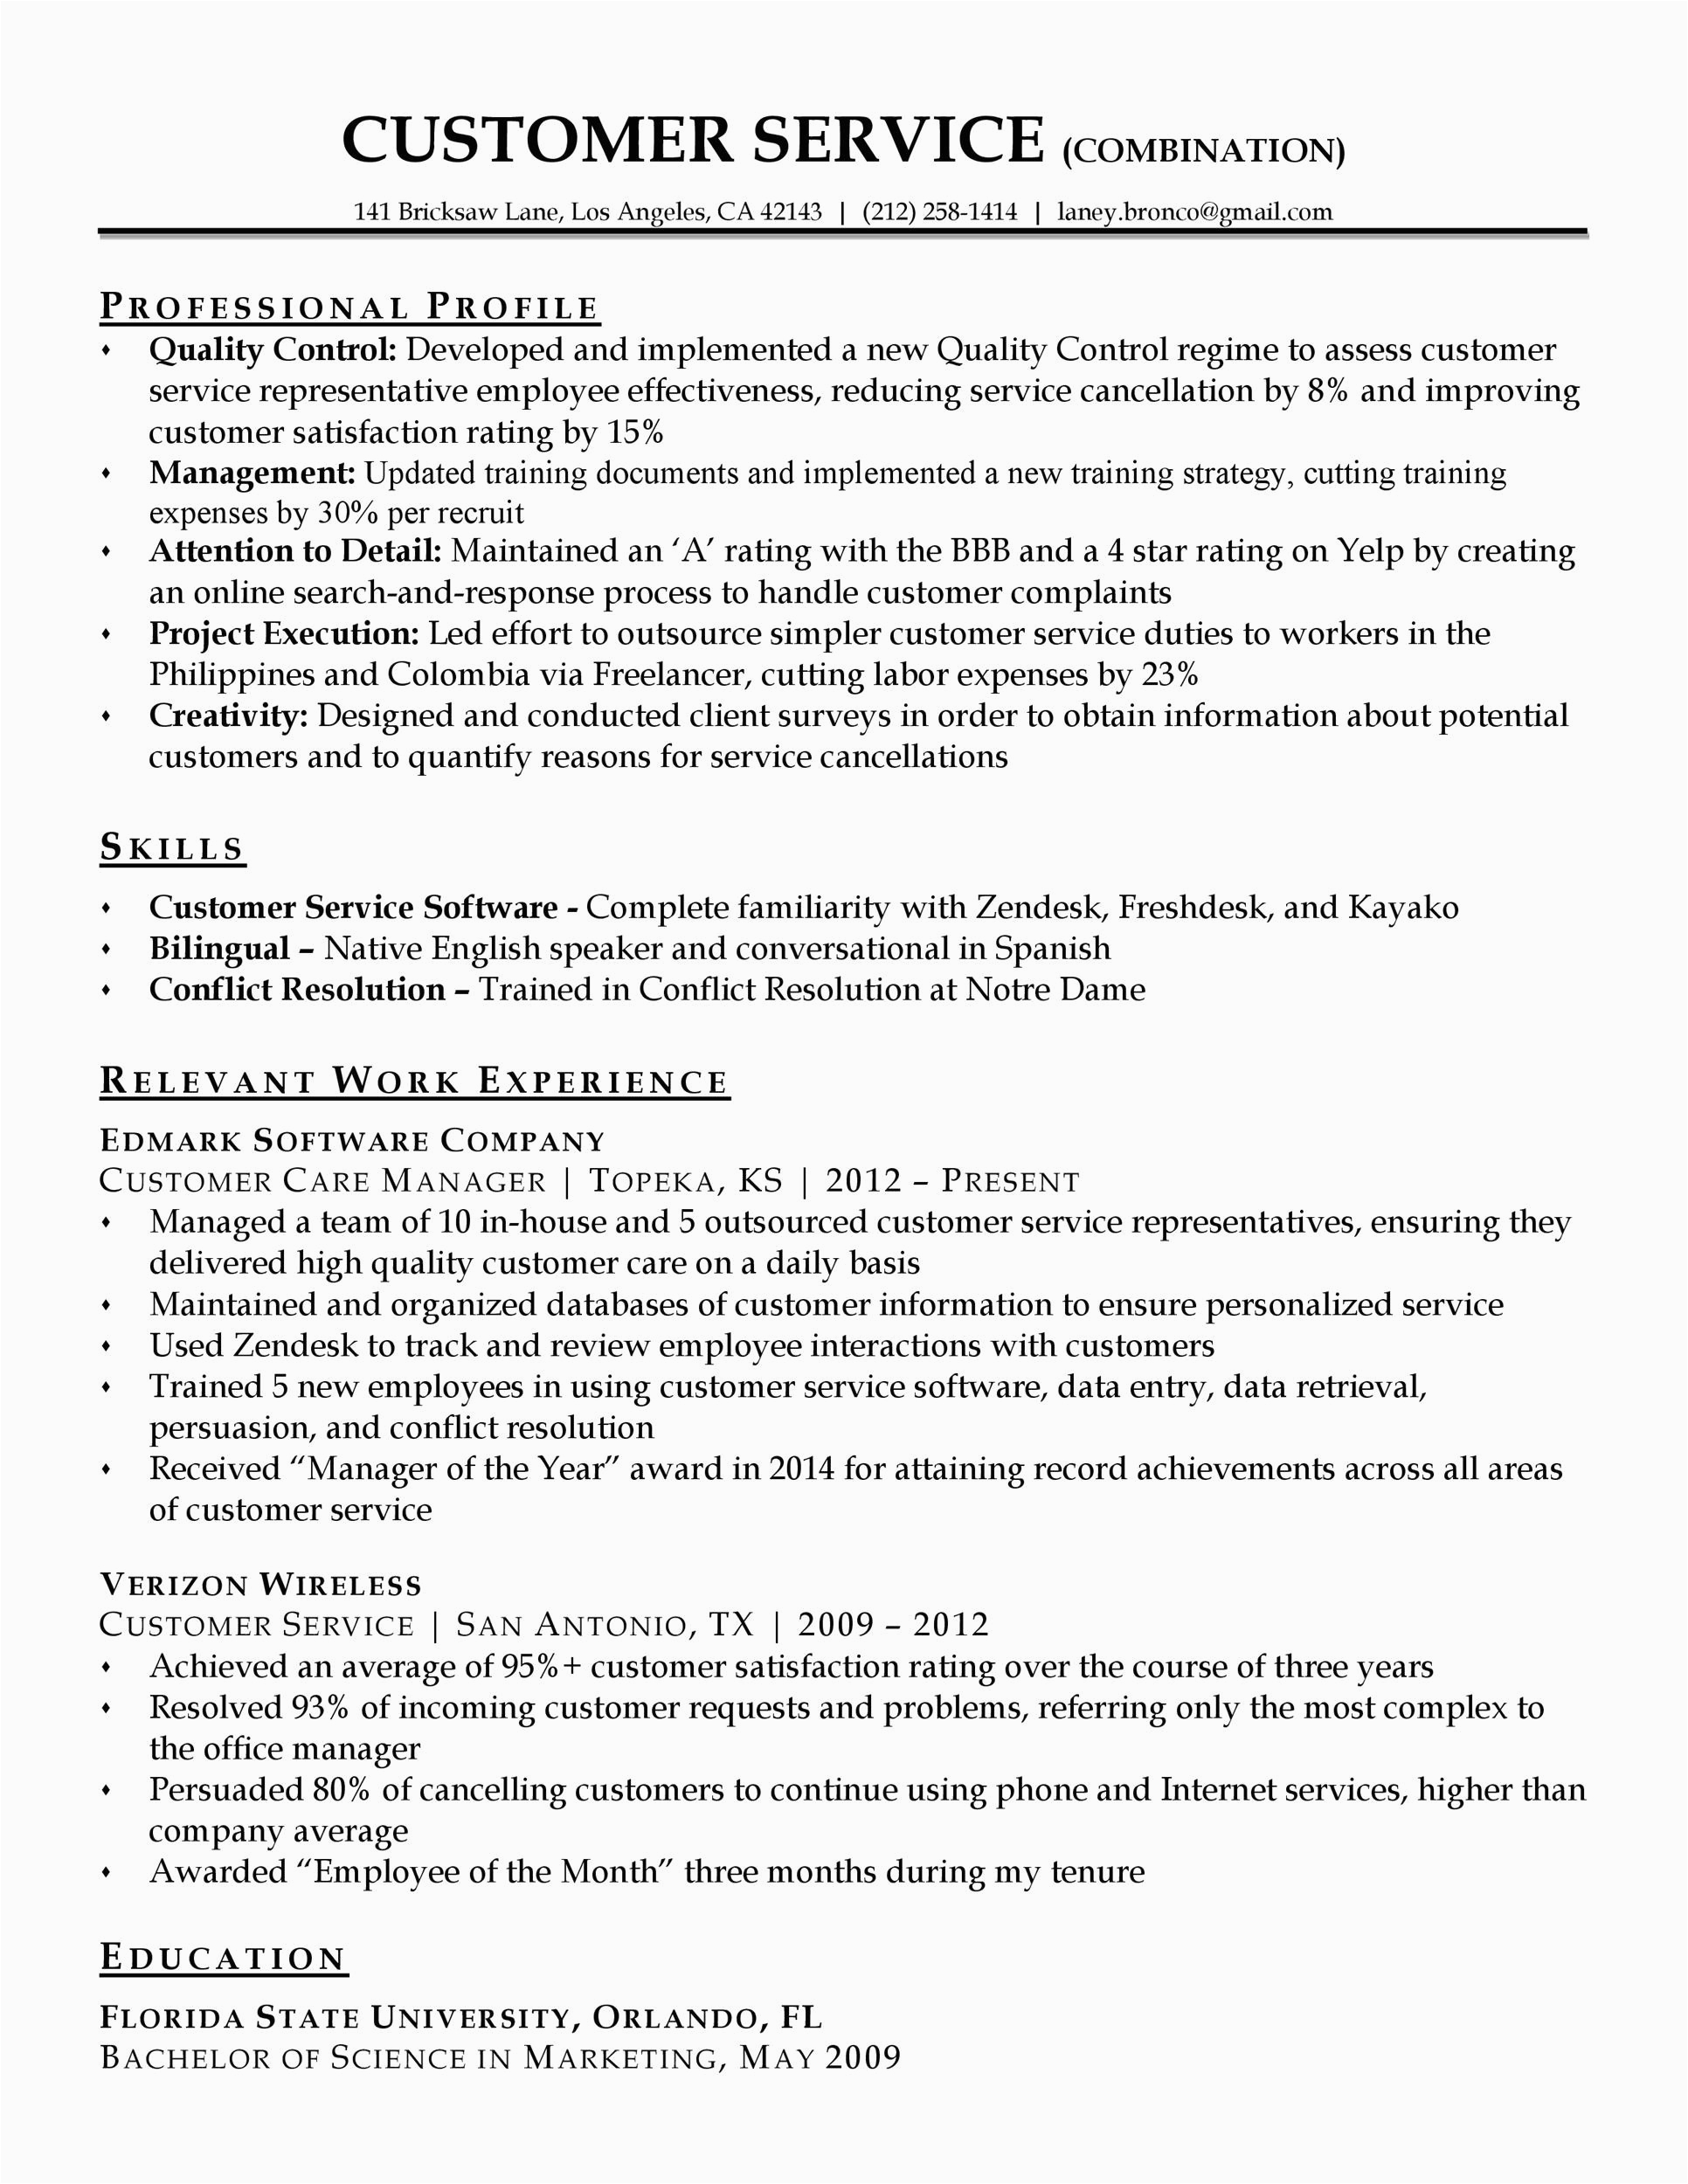 Free Resume Templates for Customer Service Representative 30 Customer Service Resume Examples Template Lab